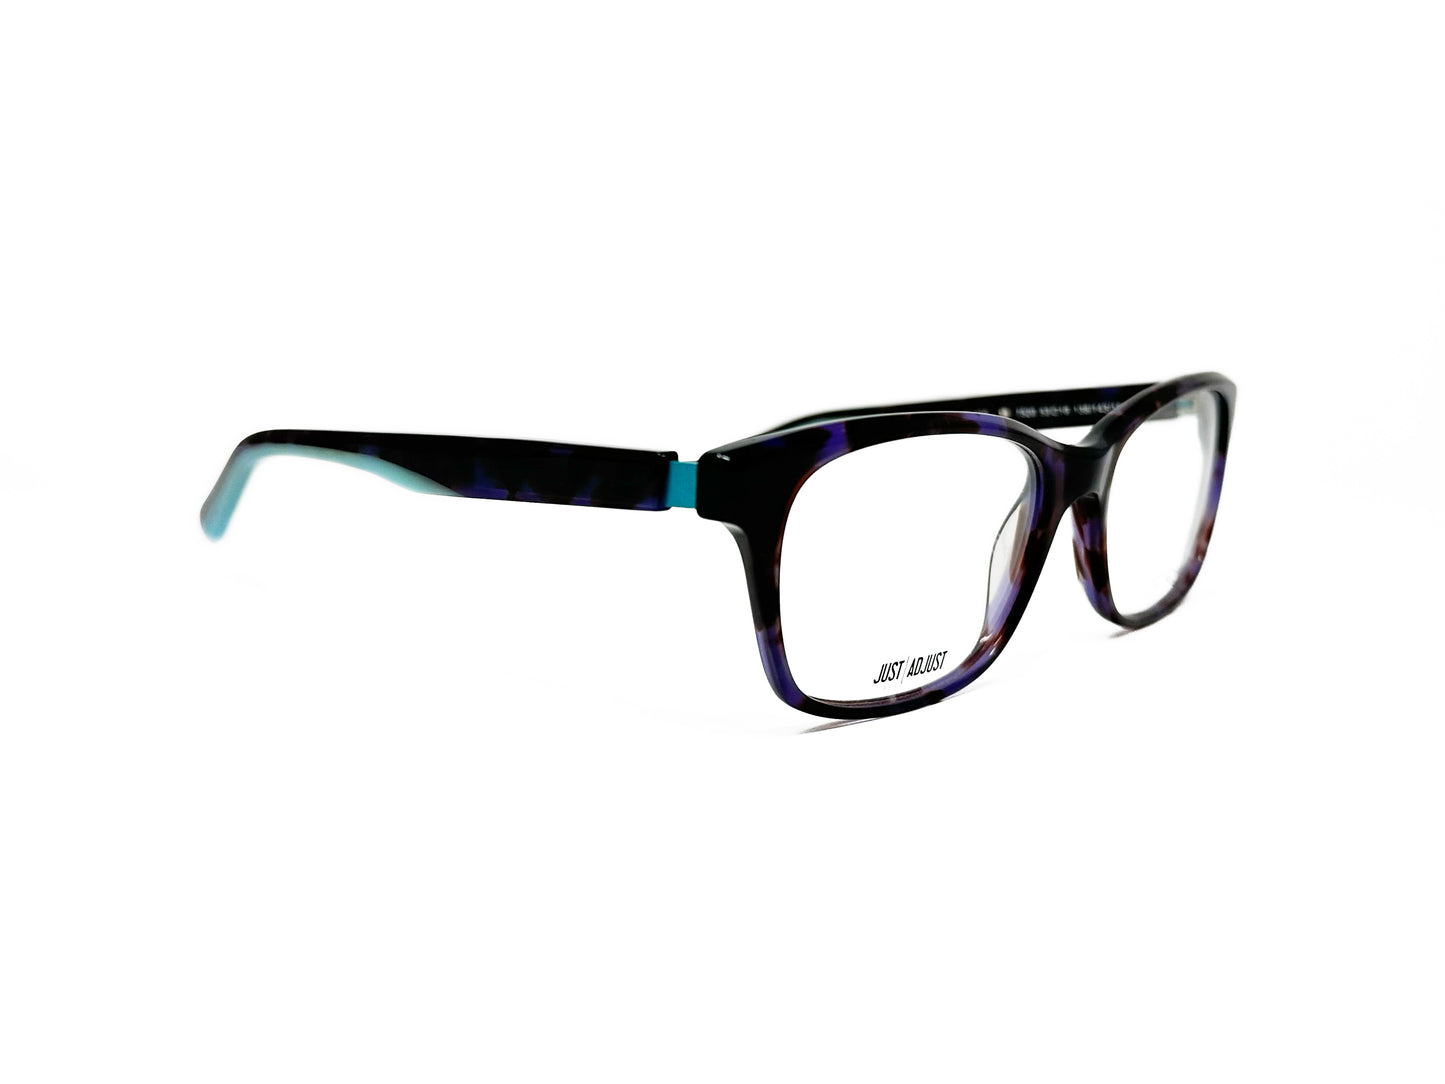 JF Rey rectangular, acetate optical frame. Model: JF1320. COlor: 7520 - Dark purple tortoise with teal accents on temples. Side view.